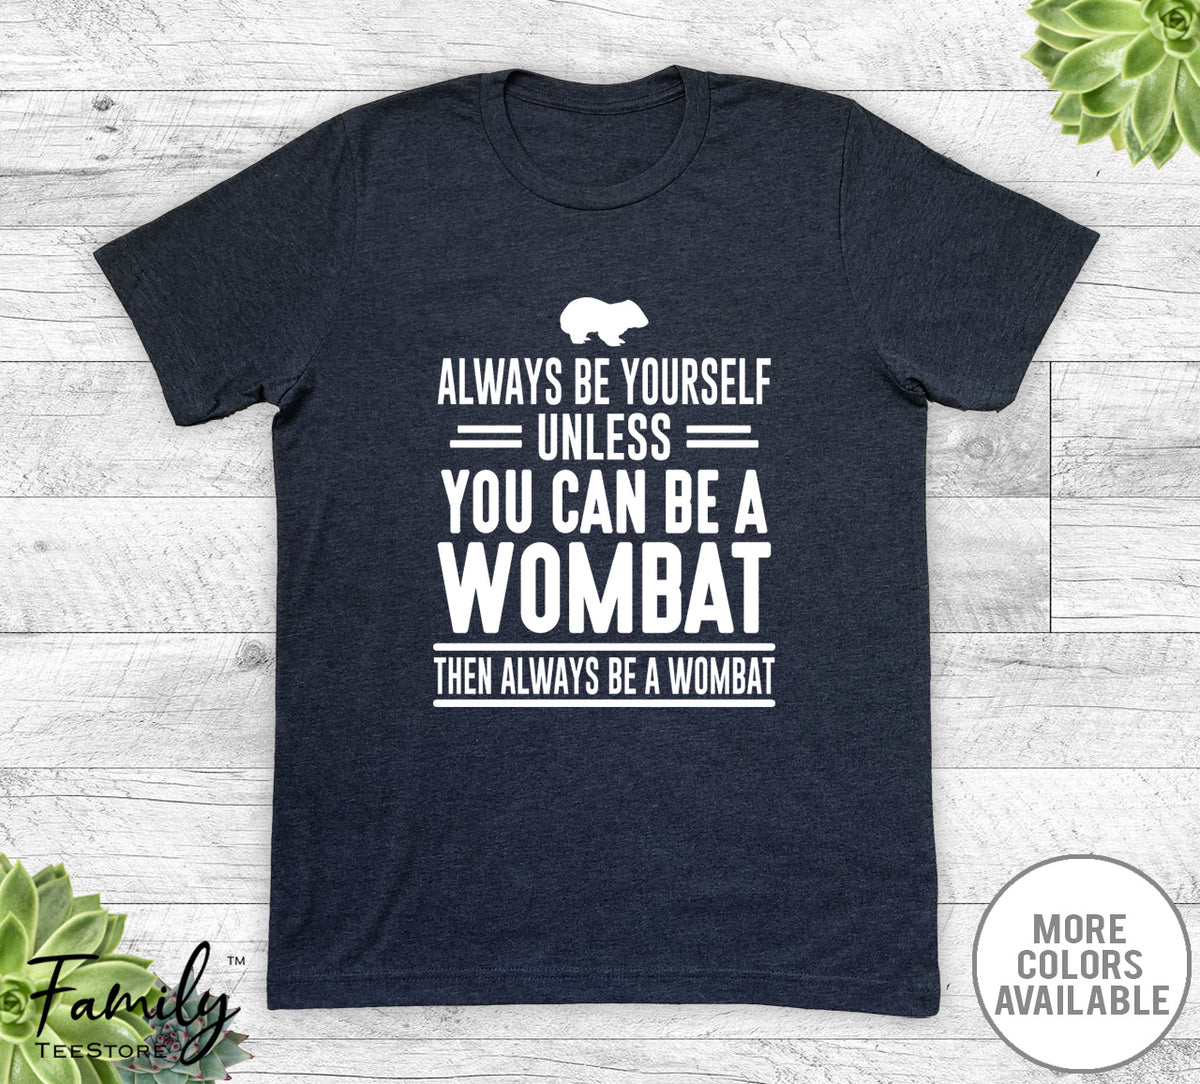 Always Be Yourself Unless You Can Be A Wombat - Unisex T-shirt - Wombat Shirt - Wombat Gift - familyteeprints